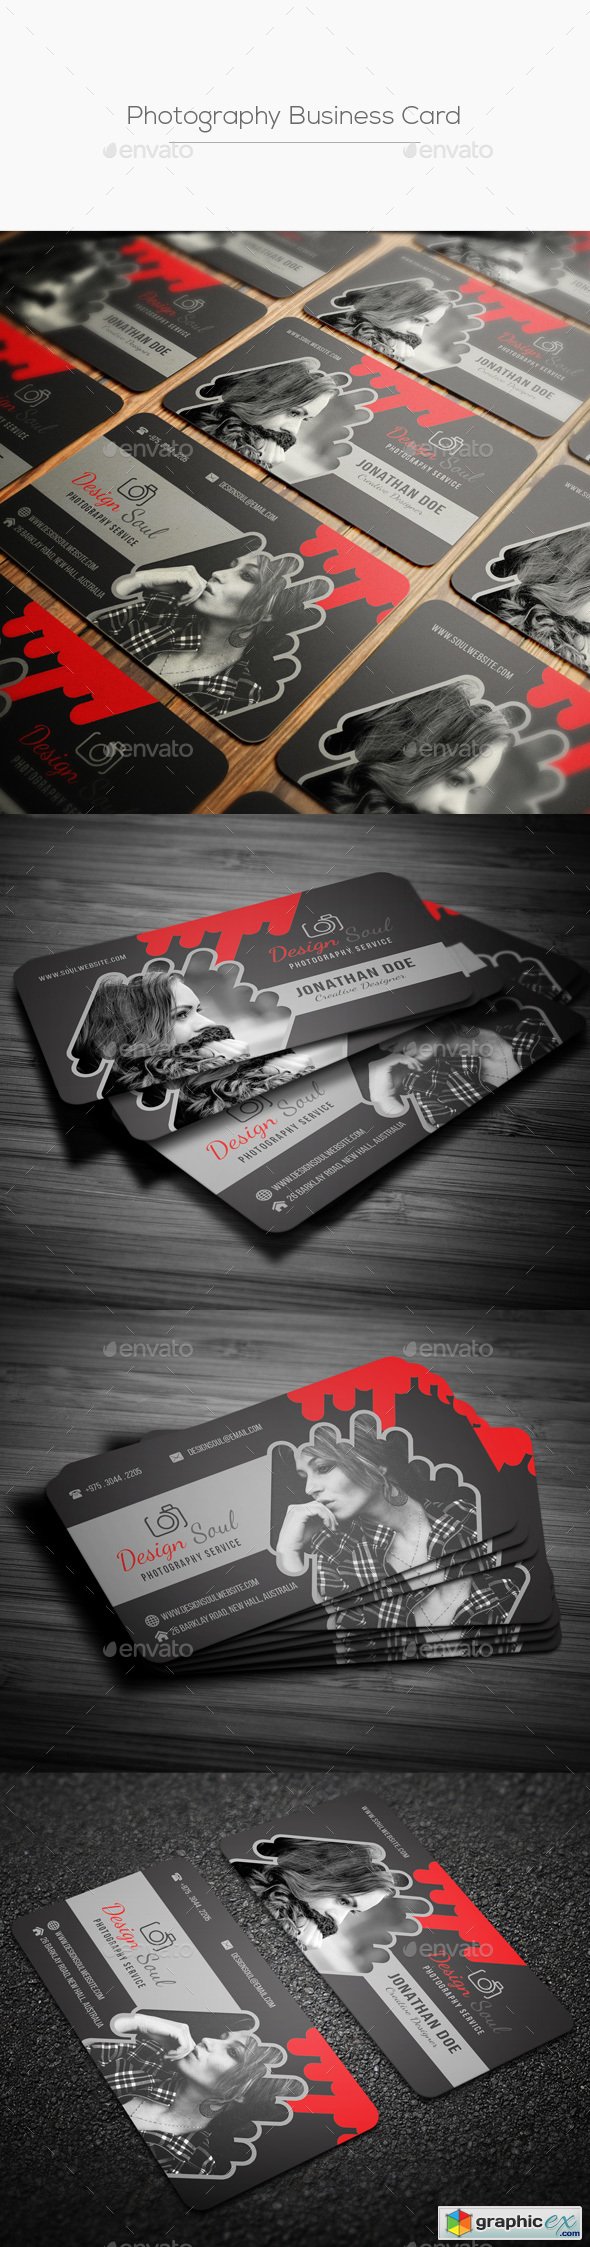 Photography Business Card 20429735